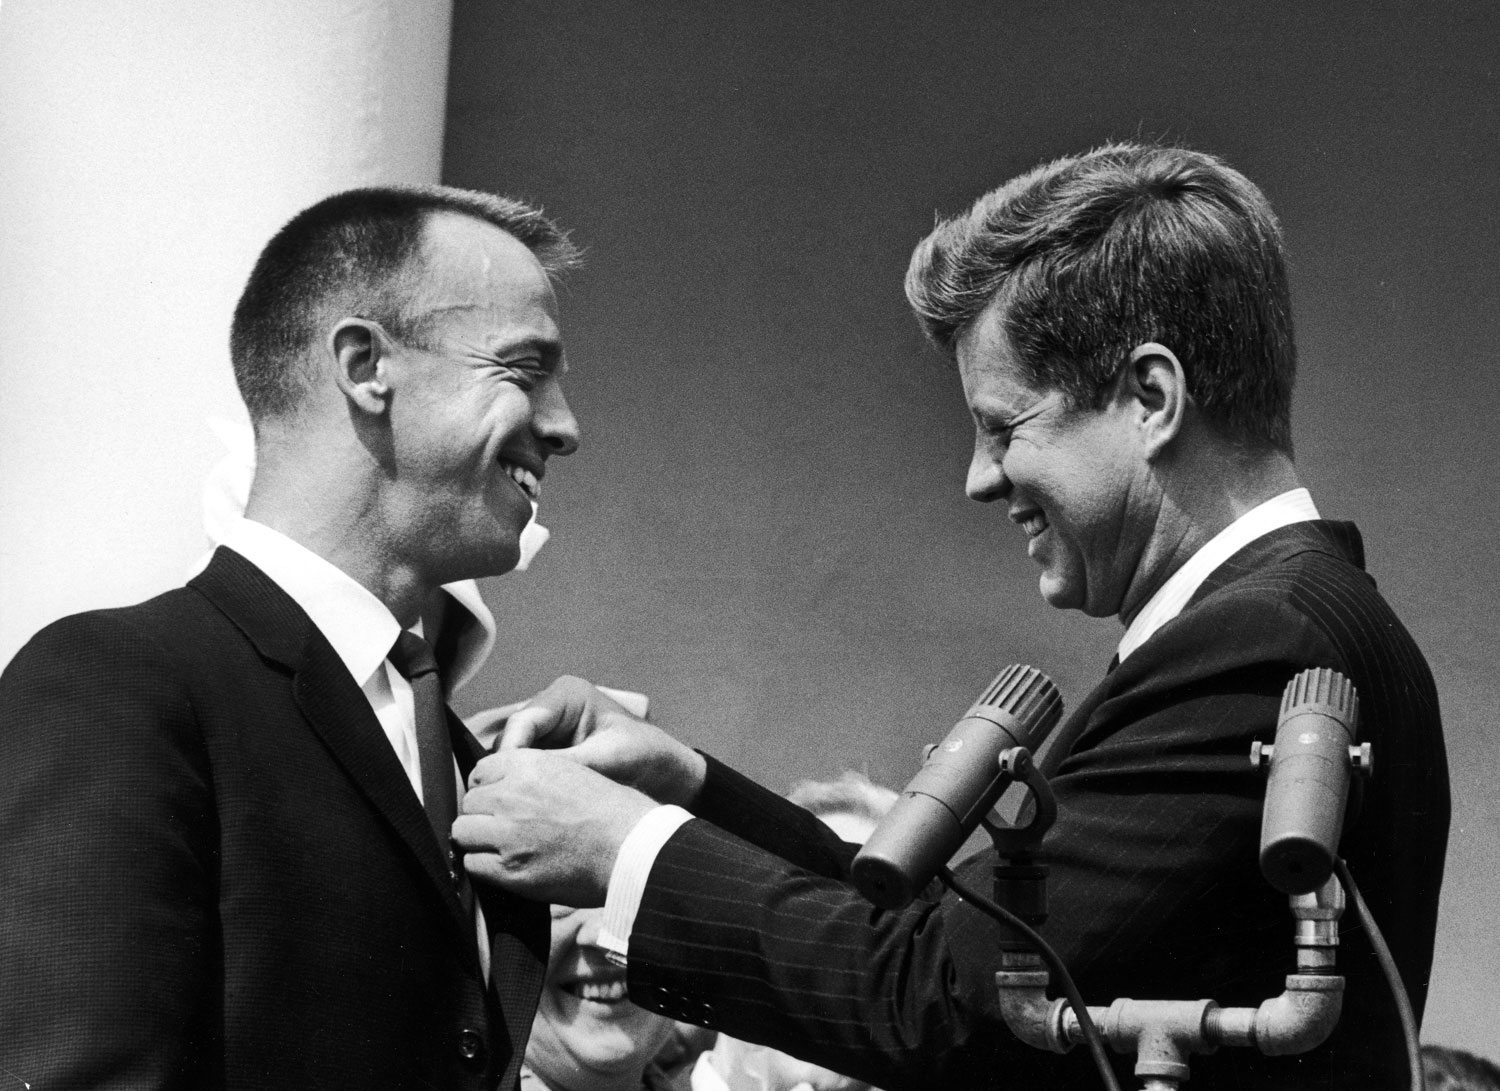 President John Kennedy pins NASA's Distinguished Service Medal on Alan Shepard's chest, 1961.